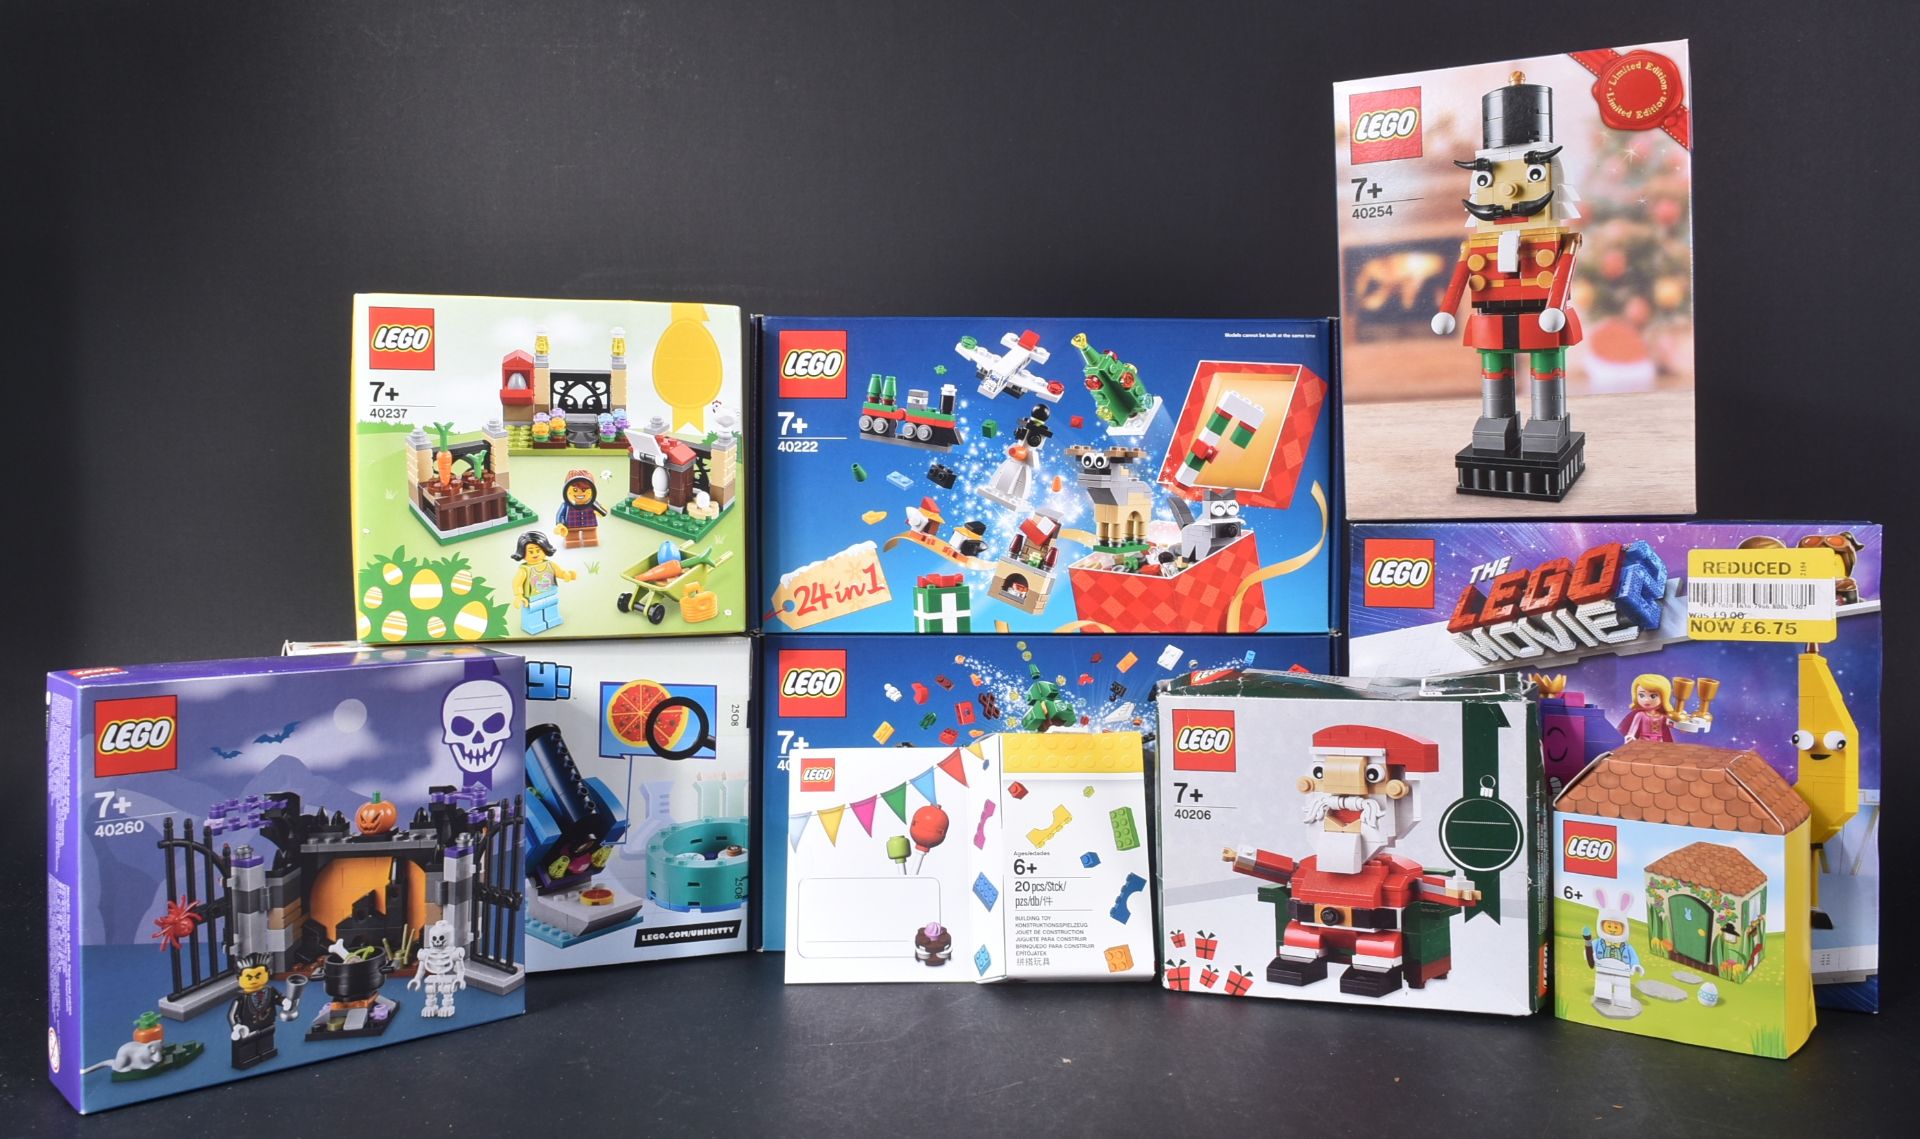 LEGO SETS - A COLLECTION OF ASSORTED LEGO SETS